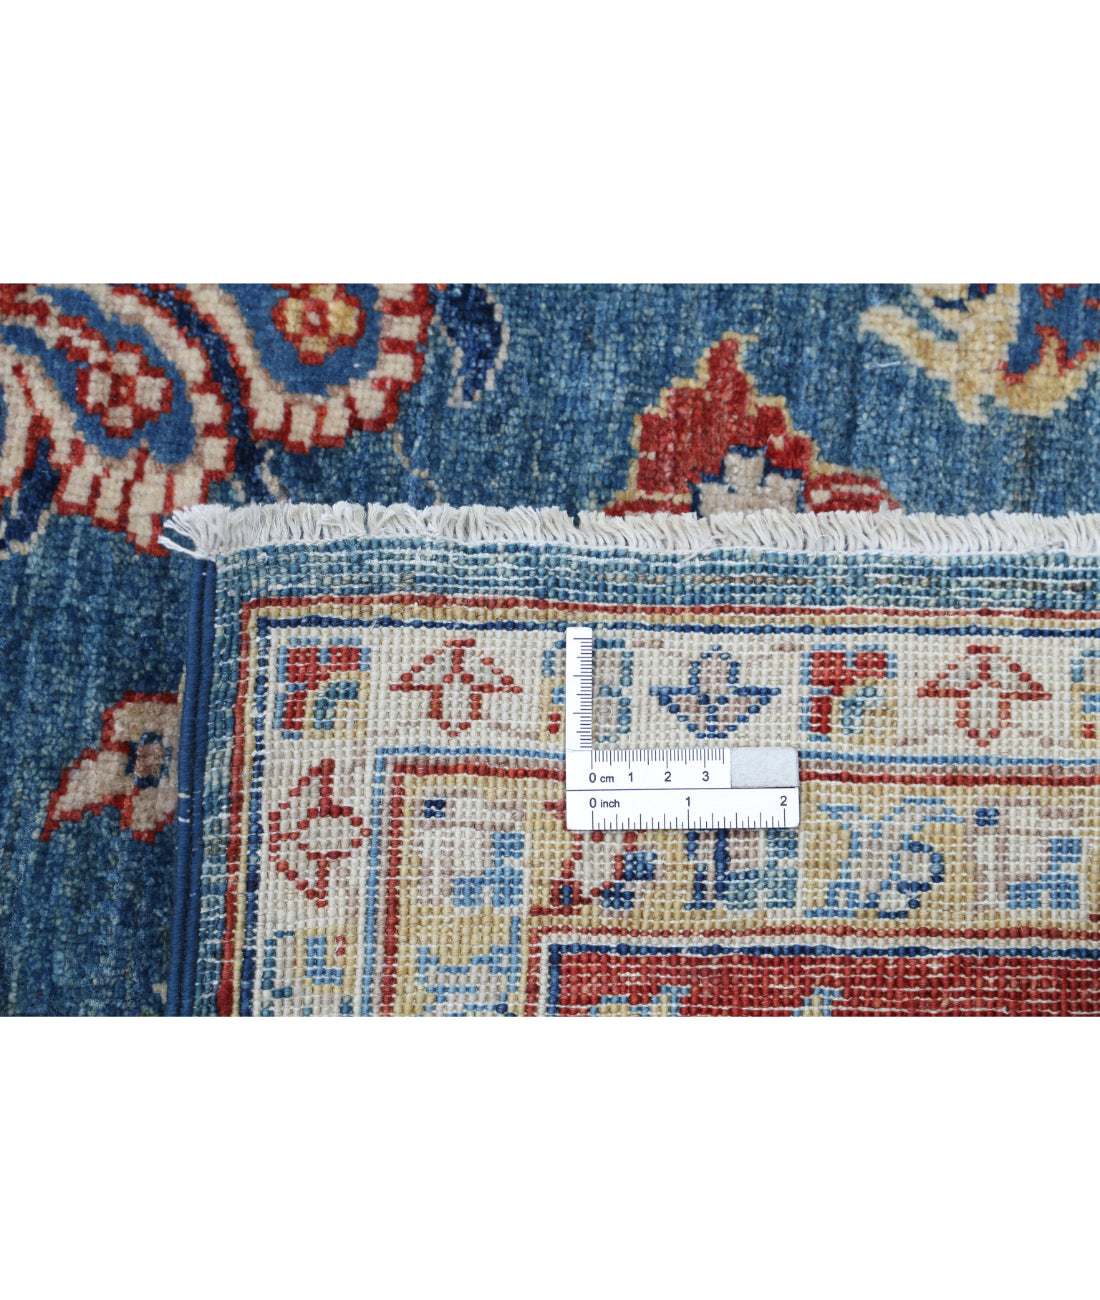 Ziegler 5'4'' X 7'9'' Hand-Knotted Wool Rug 5'4'' x 7'9'' (160 X 233) / Blue / Red